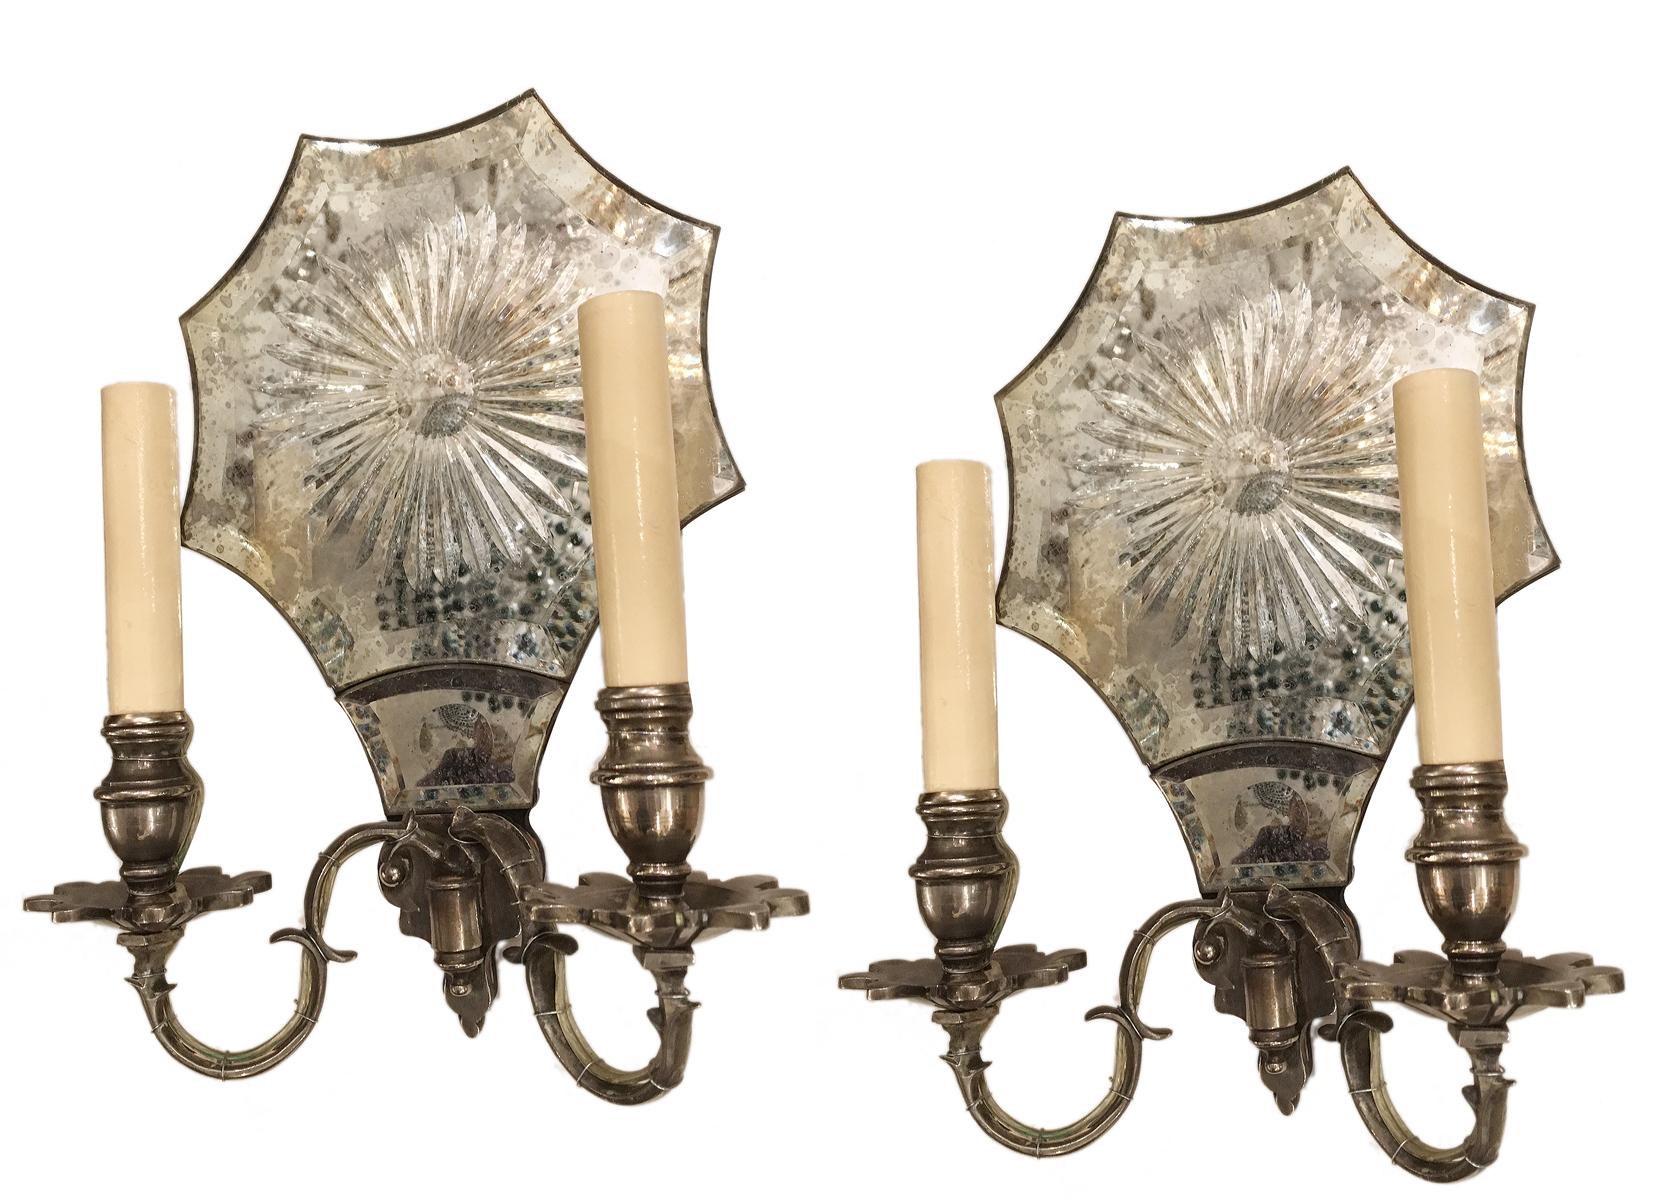 Pair of circa 1950s American etched mirror sconces with silver plated body. 

Measurements:
Height 12